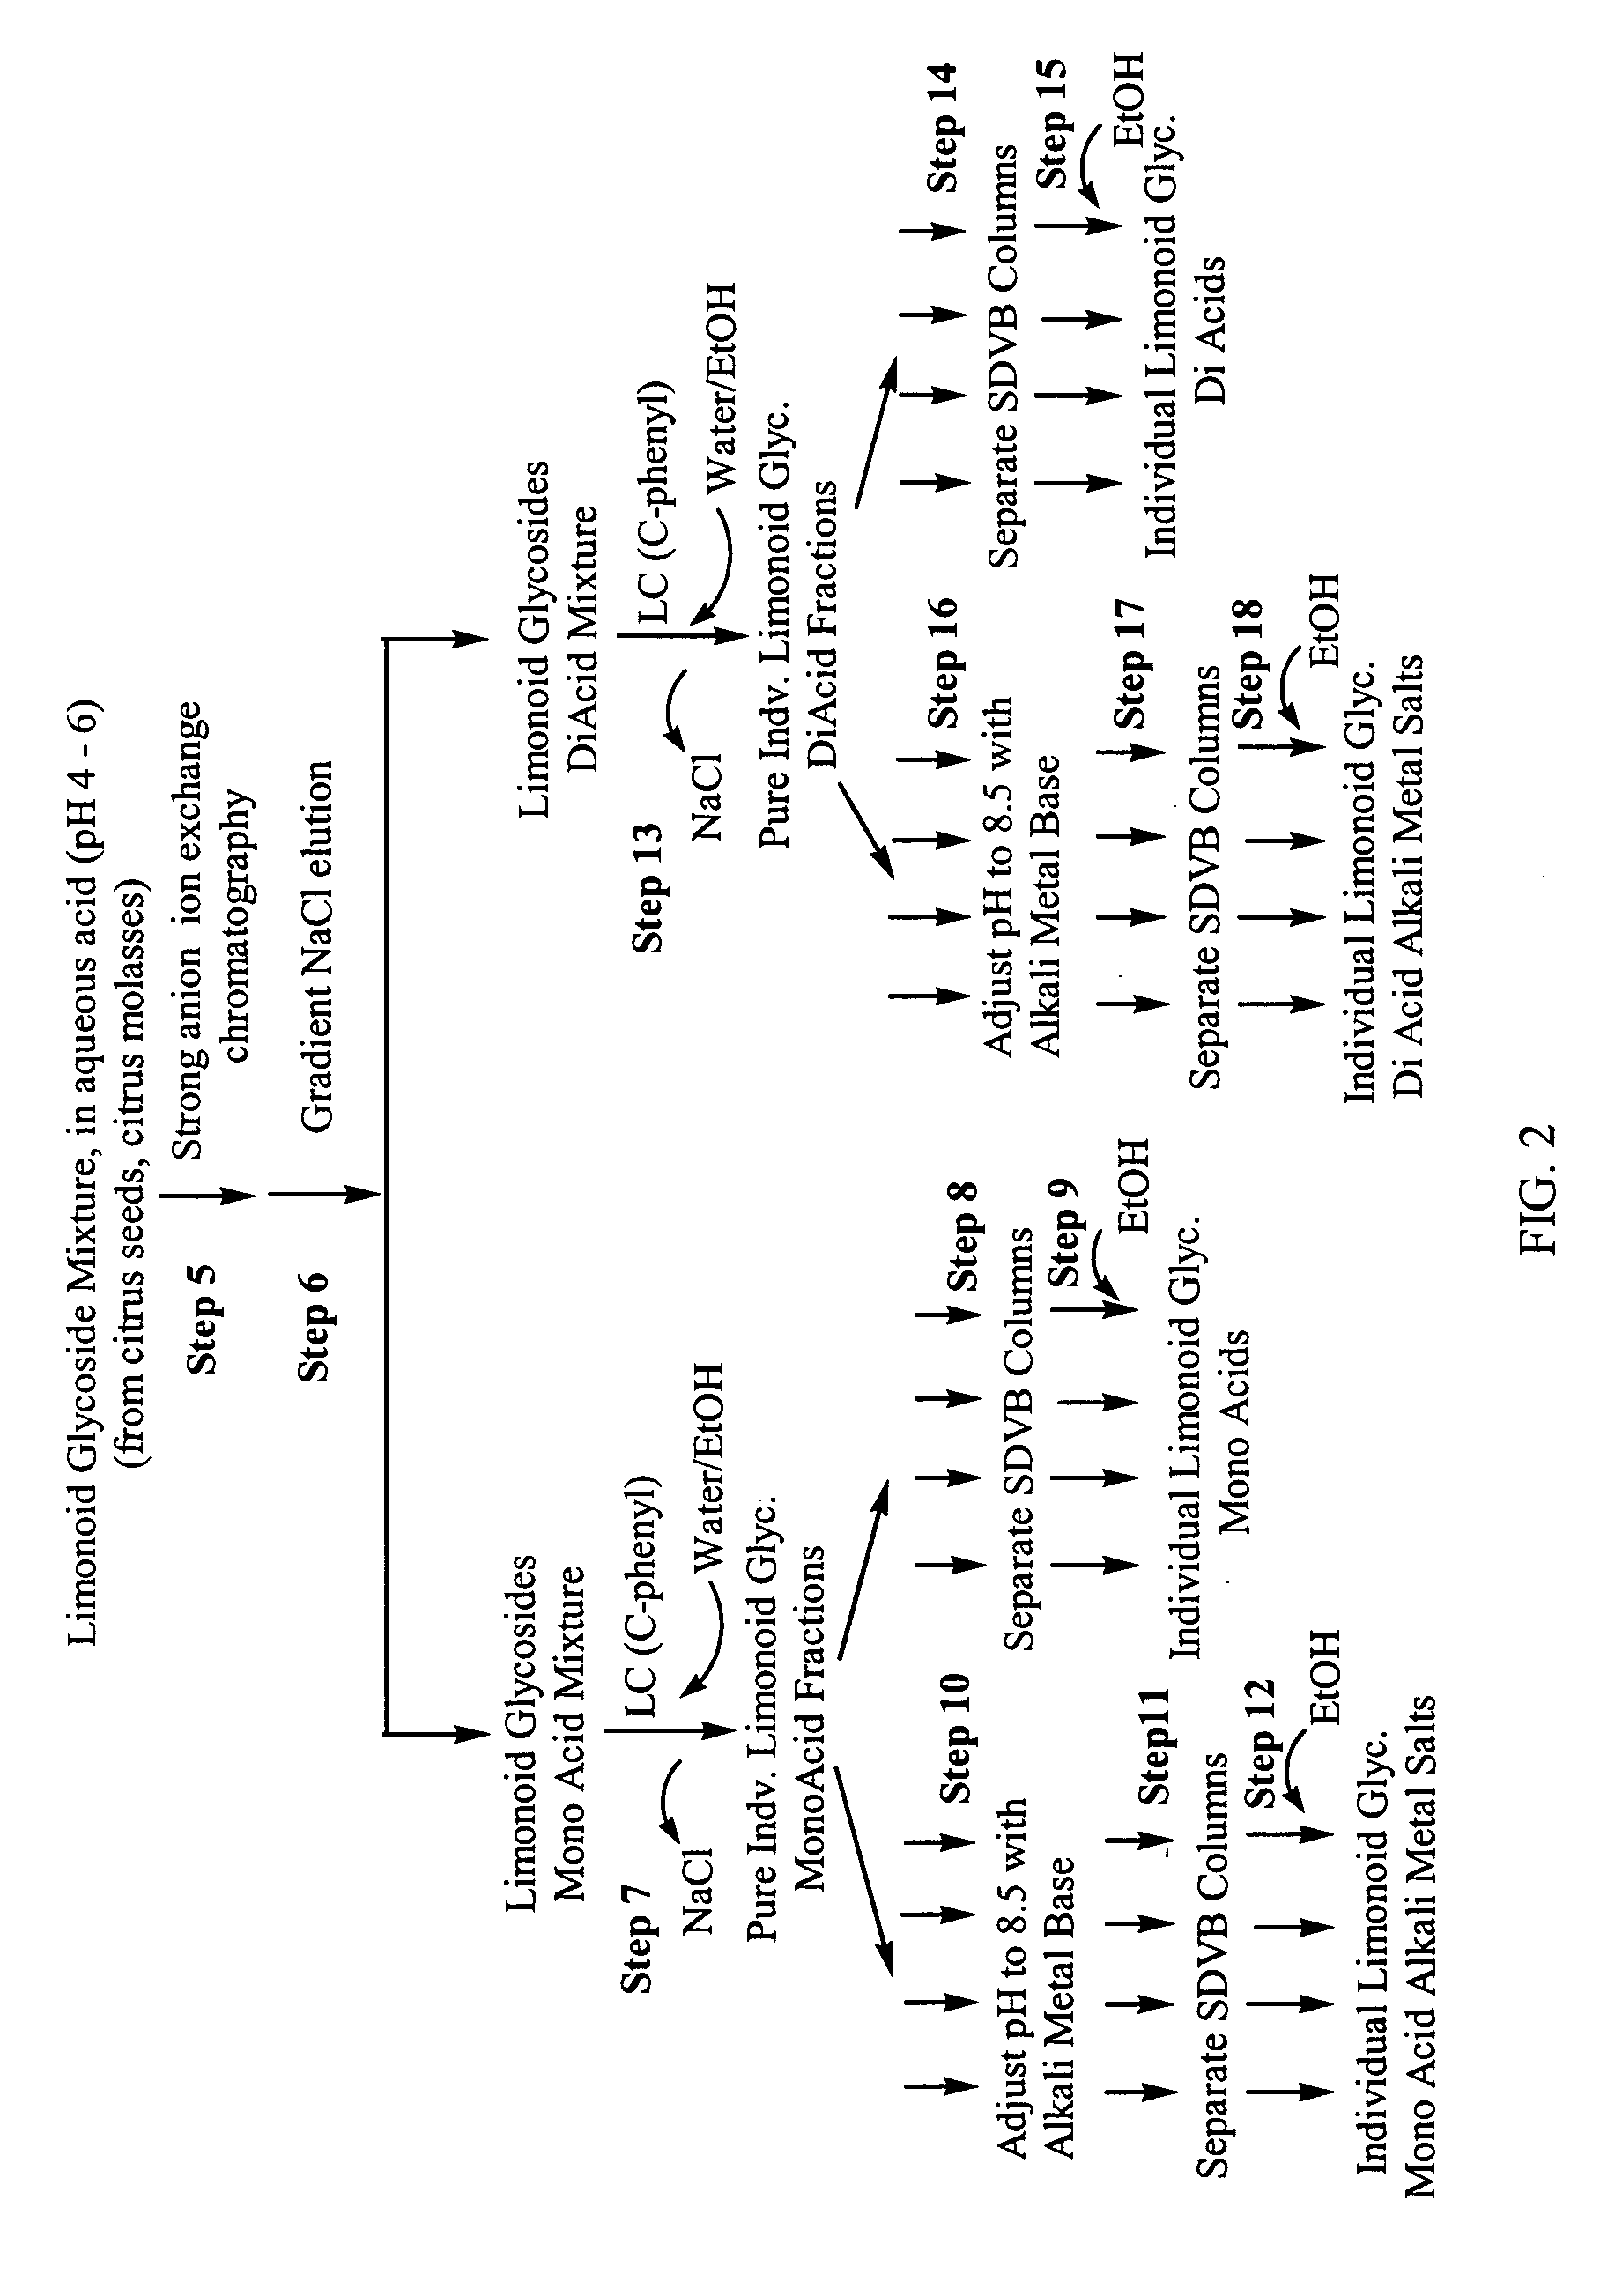 Manufacture of limonoid compounds